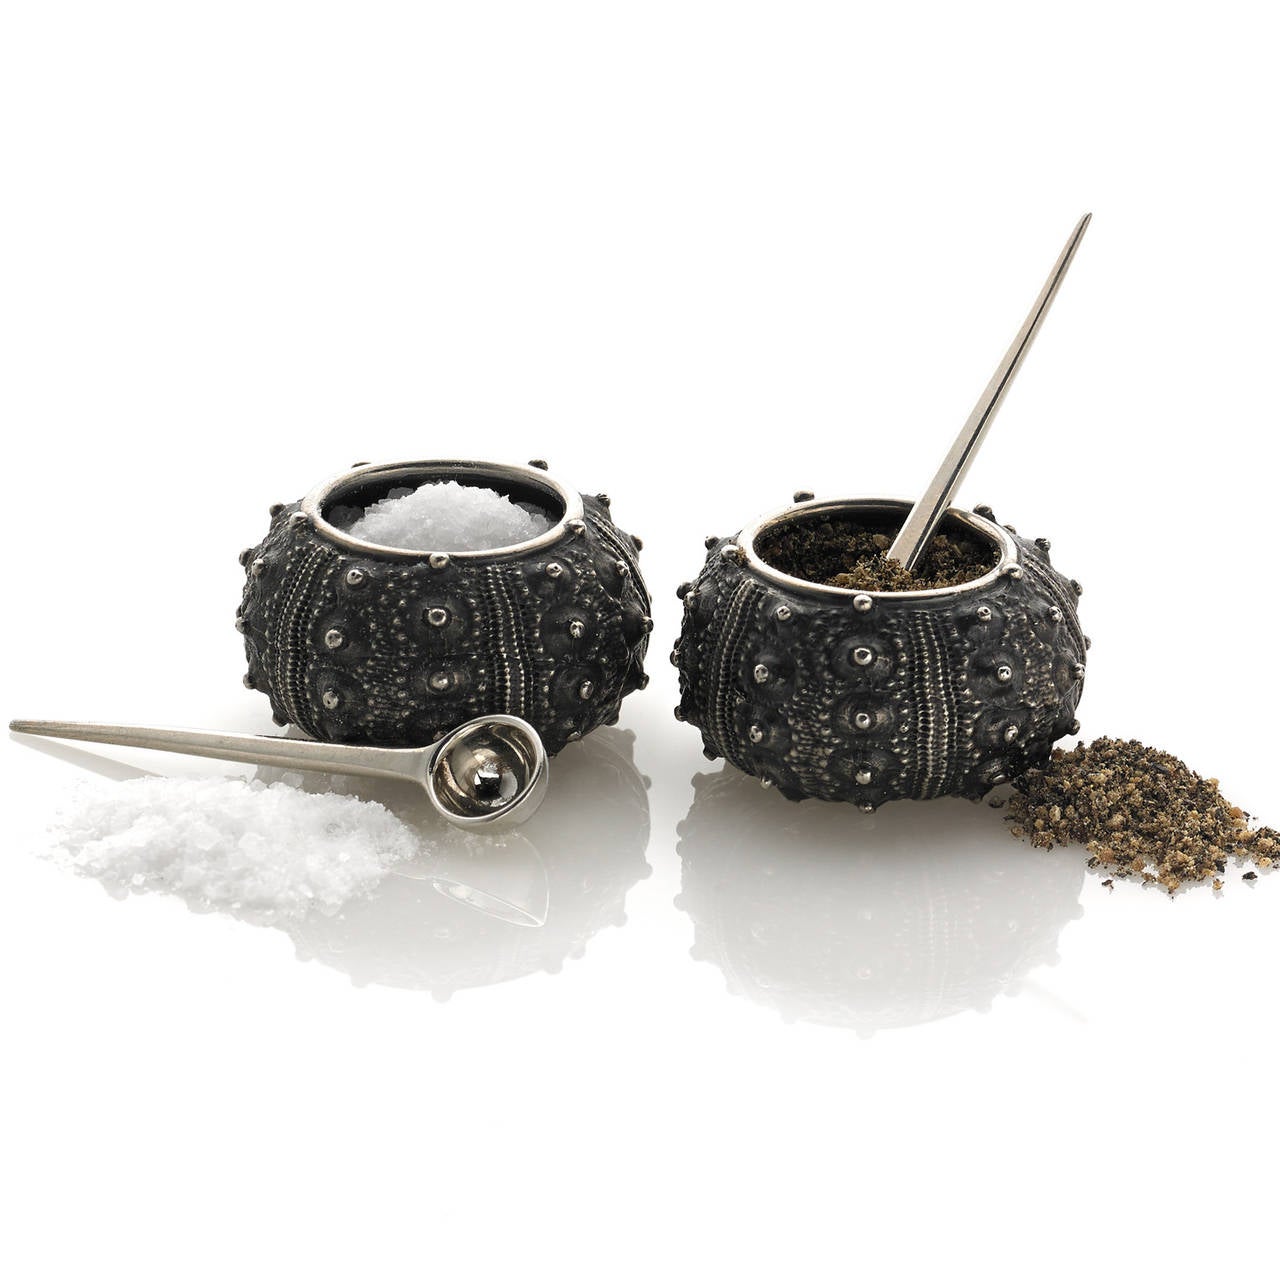 Sea Urchin Salt and Pepper Cellars handcrafted in oxidized sterling silver with bright sterling silver accents and bright sterling silver spoons.